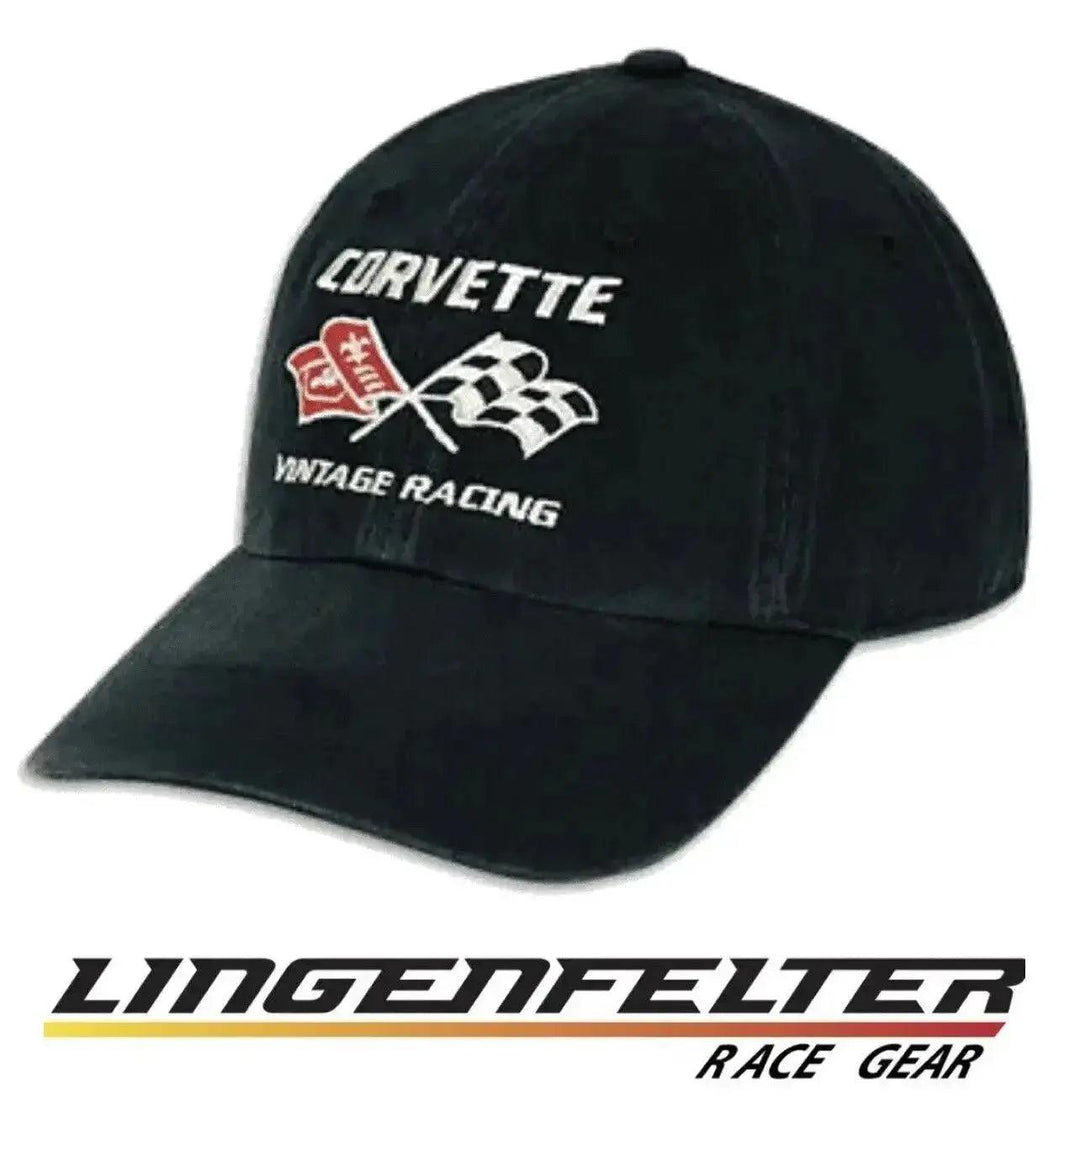 CORVETTE VINTAGE RACING WASHED CHINO CAP	 